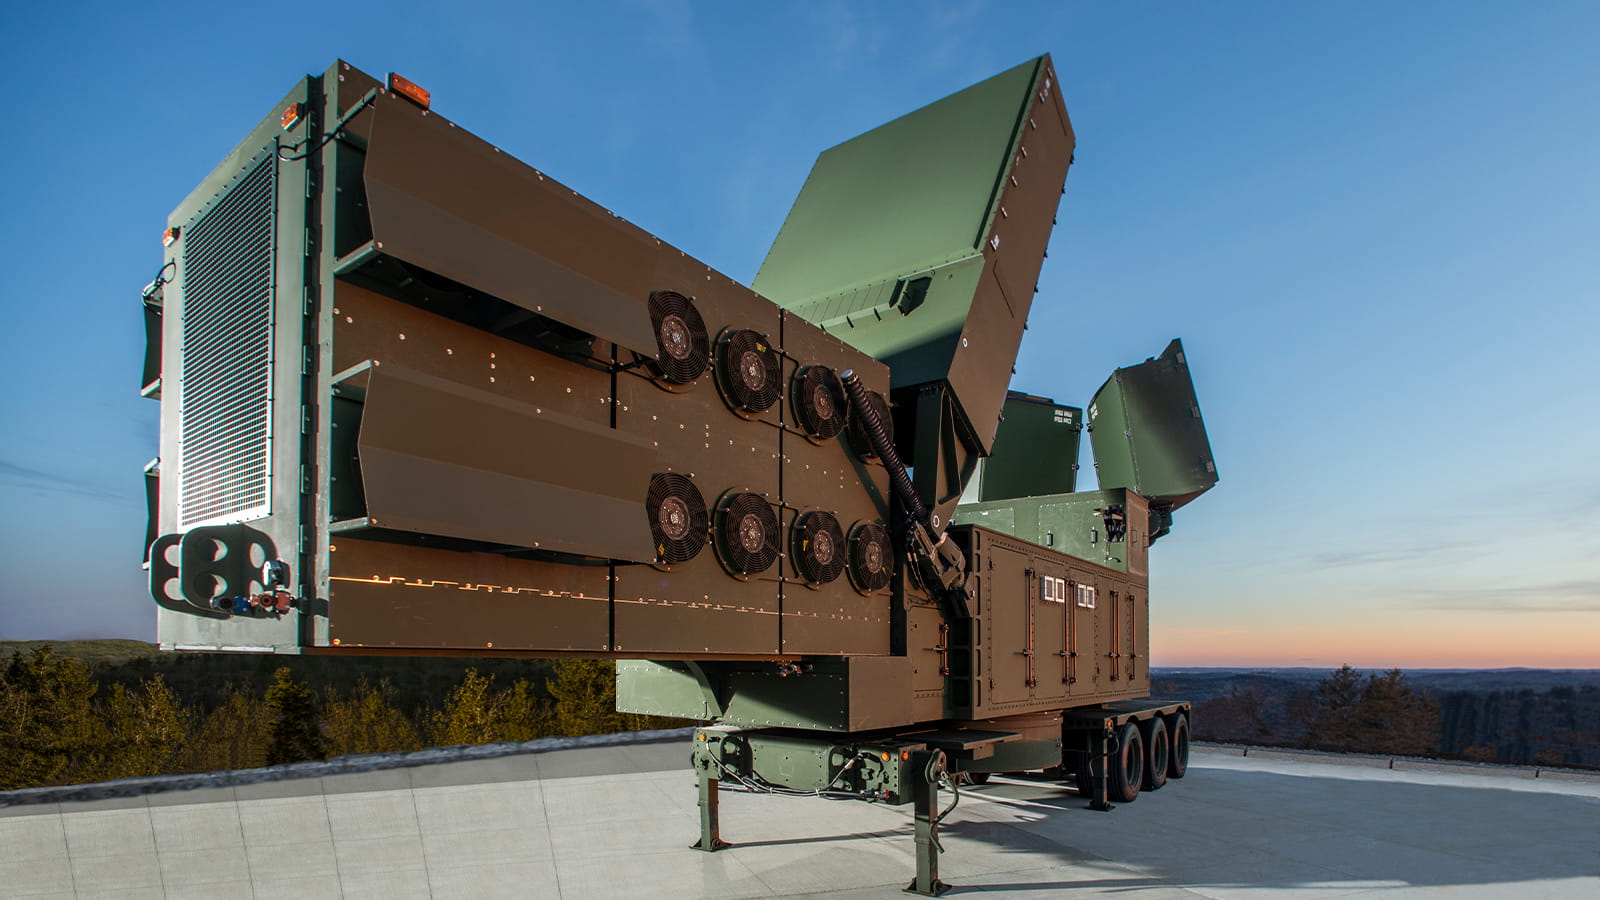 LTAMDS is the next generation air and missile defense radar, providing dramatically more performance against the range of threats, from manned and unmanned aircraft to cruise missiles, ballistic missiles and hypersonics.